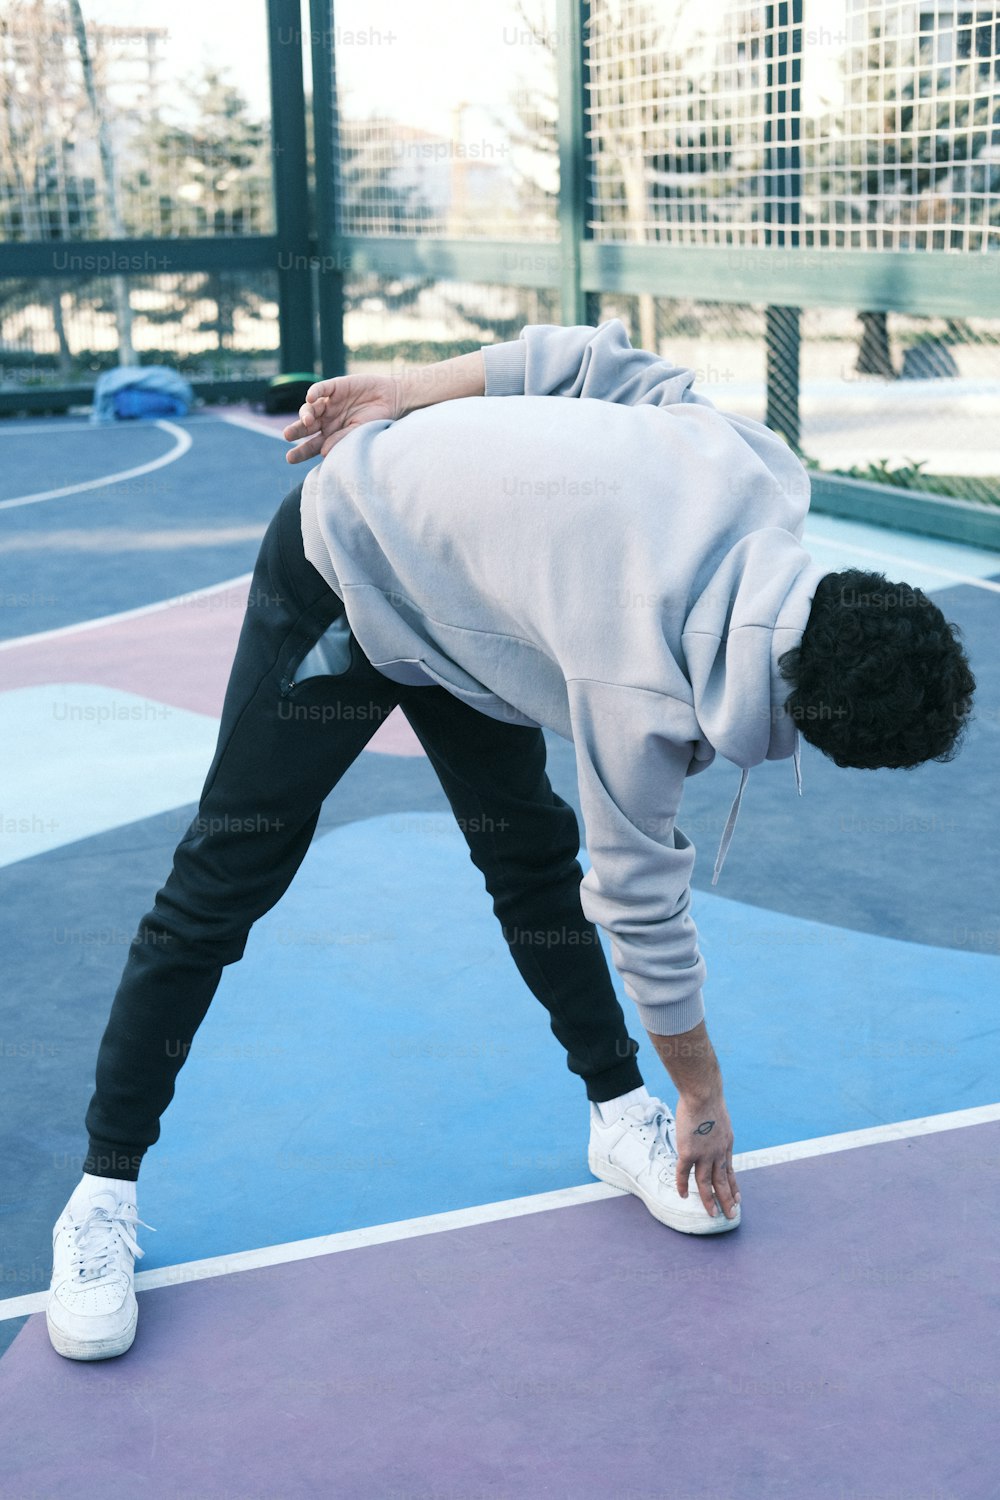 a person bending over on a tennis court